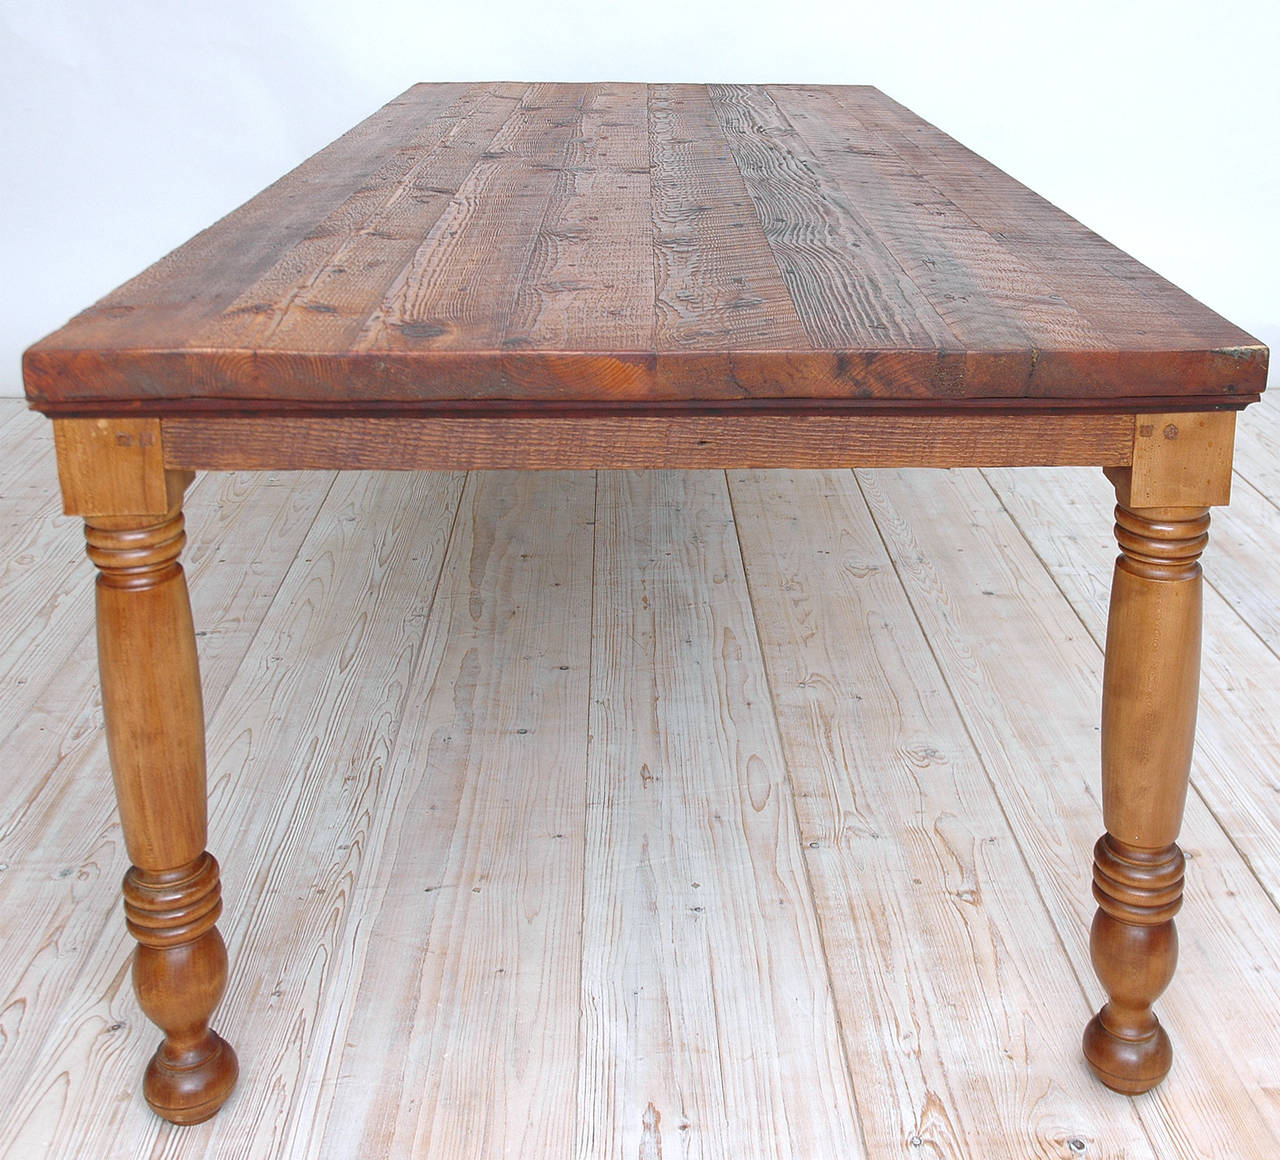 A beautifully crafted and finished eight foot long dining table in reclaimed pine timbers with thick plank top and turned legs. Tung oil finish. Seats 10.
Dining table as shown with west coast Ponderosa pine top and apron with turned legs in